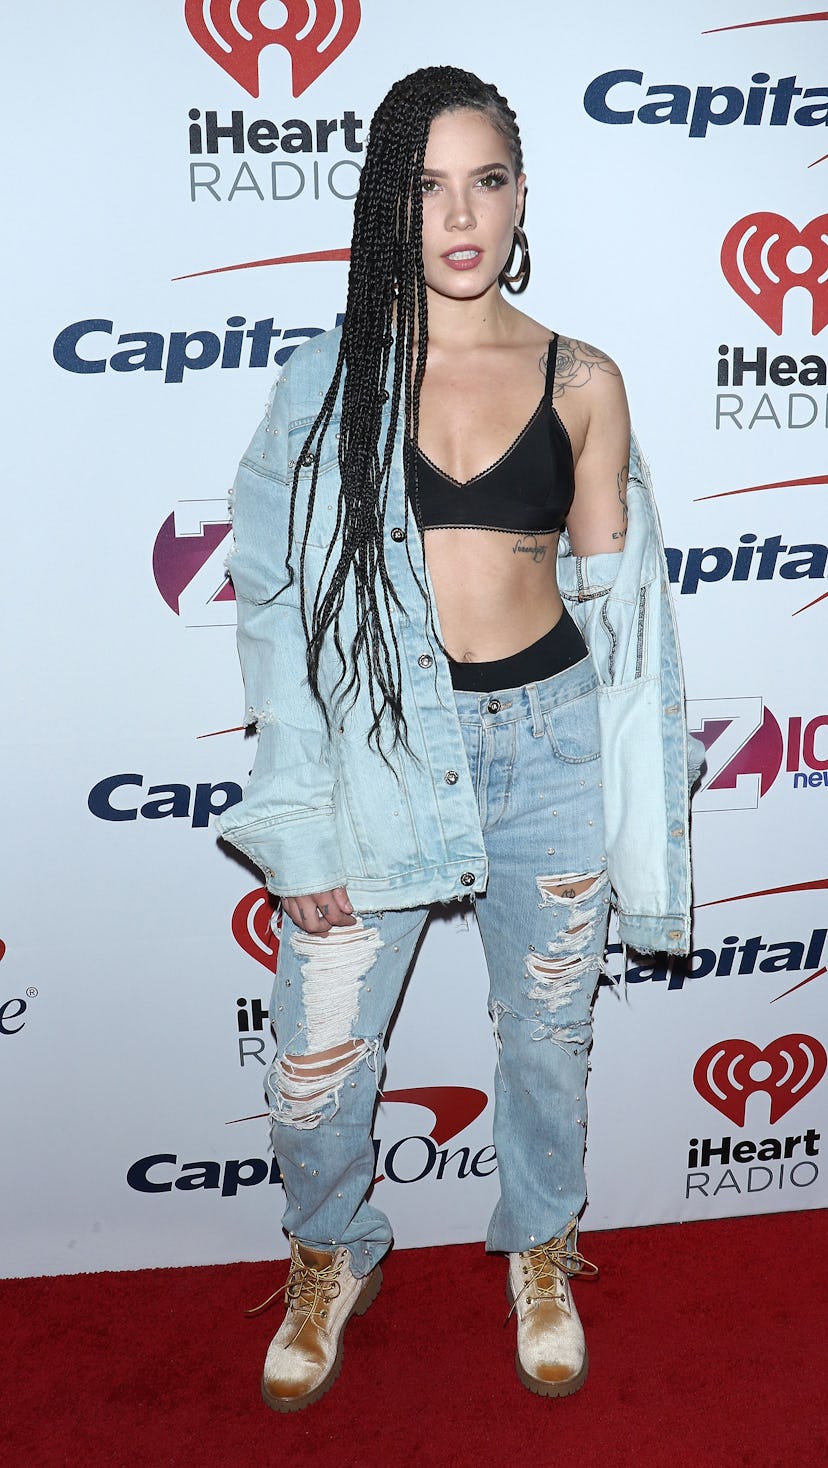 Halsey attends the Z100's iHeartRadio Jingle Ball 2017 at Madison Square Garden on December 8, 2017 